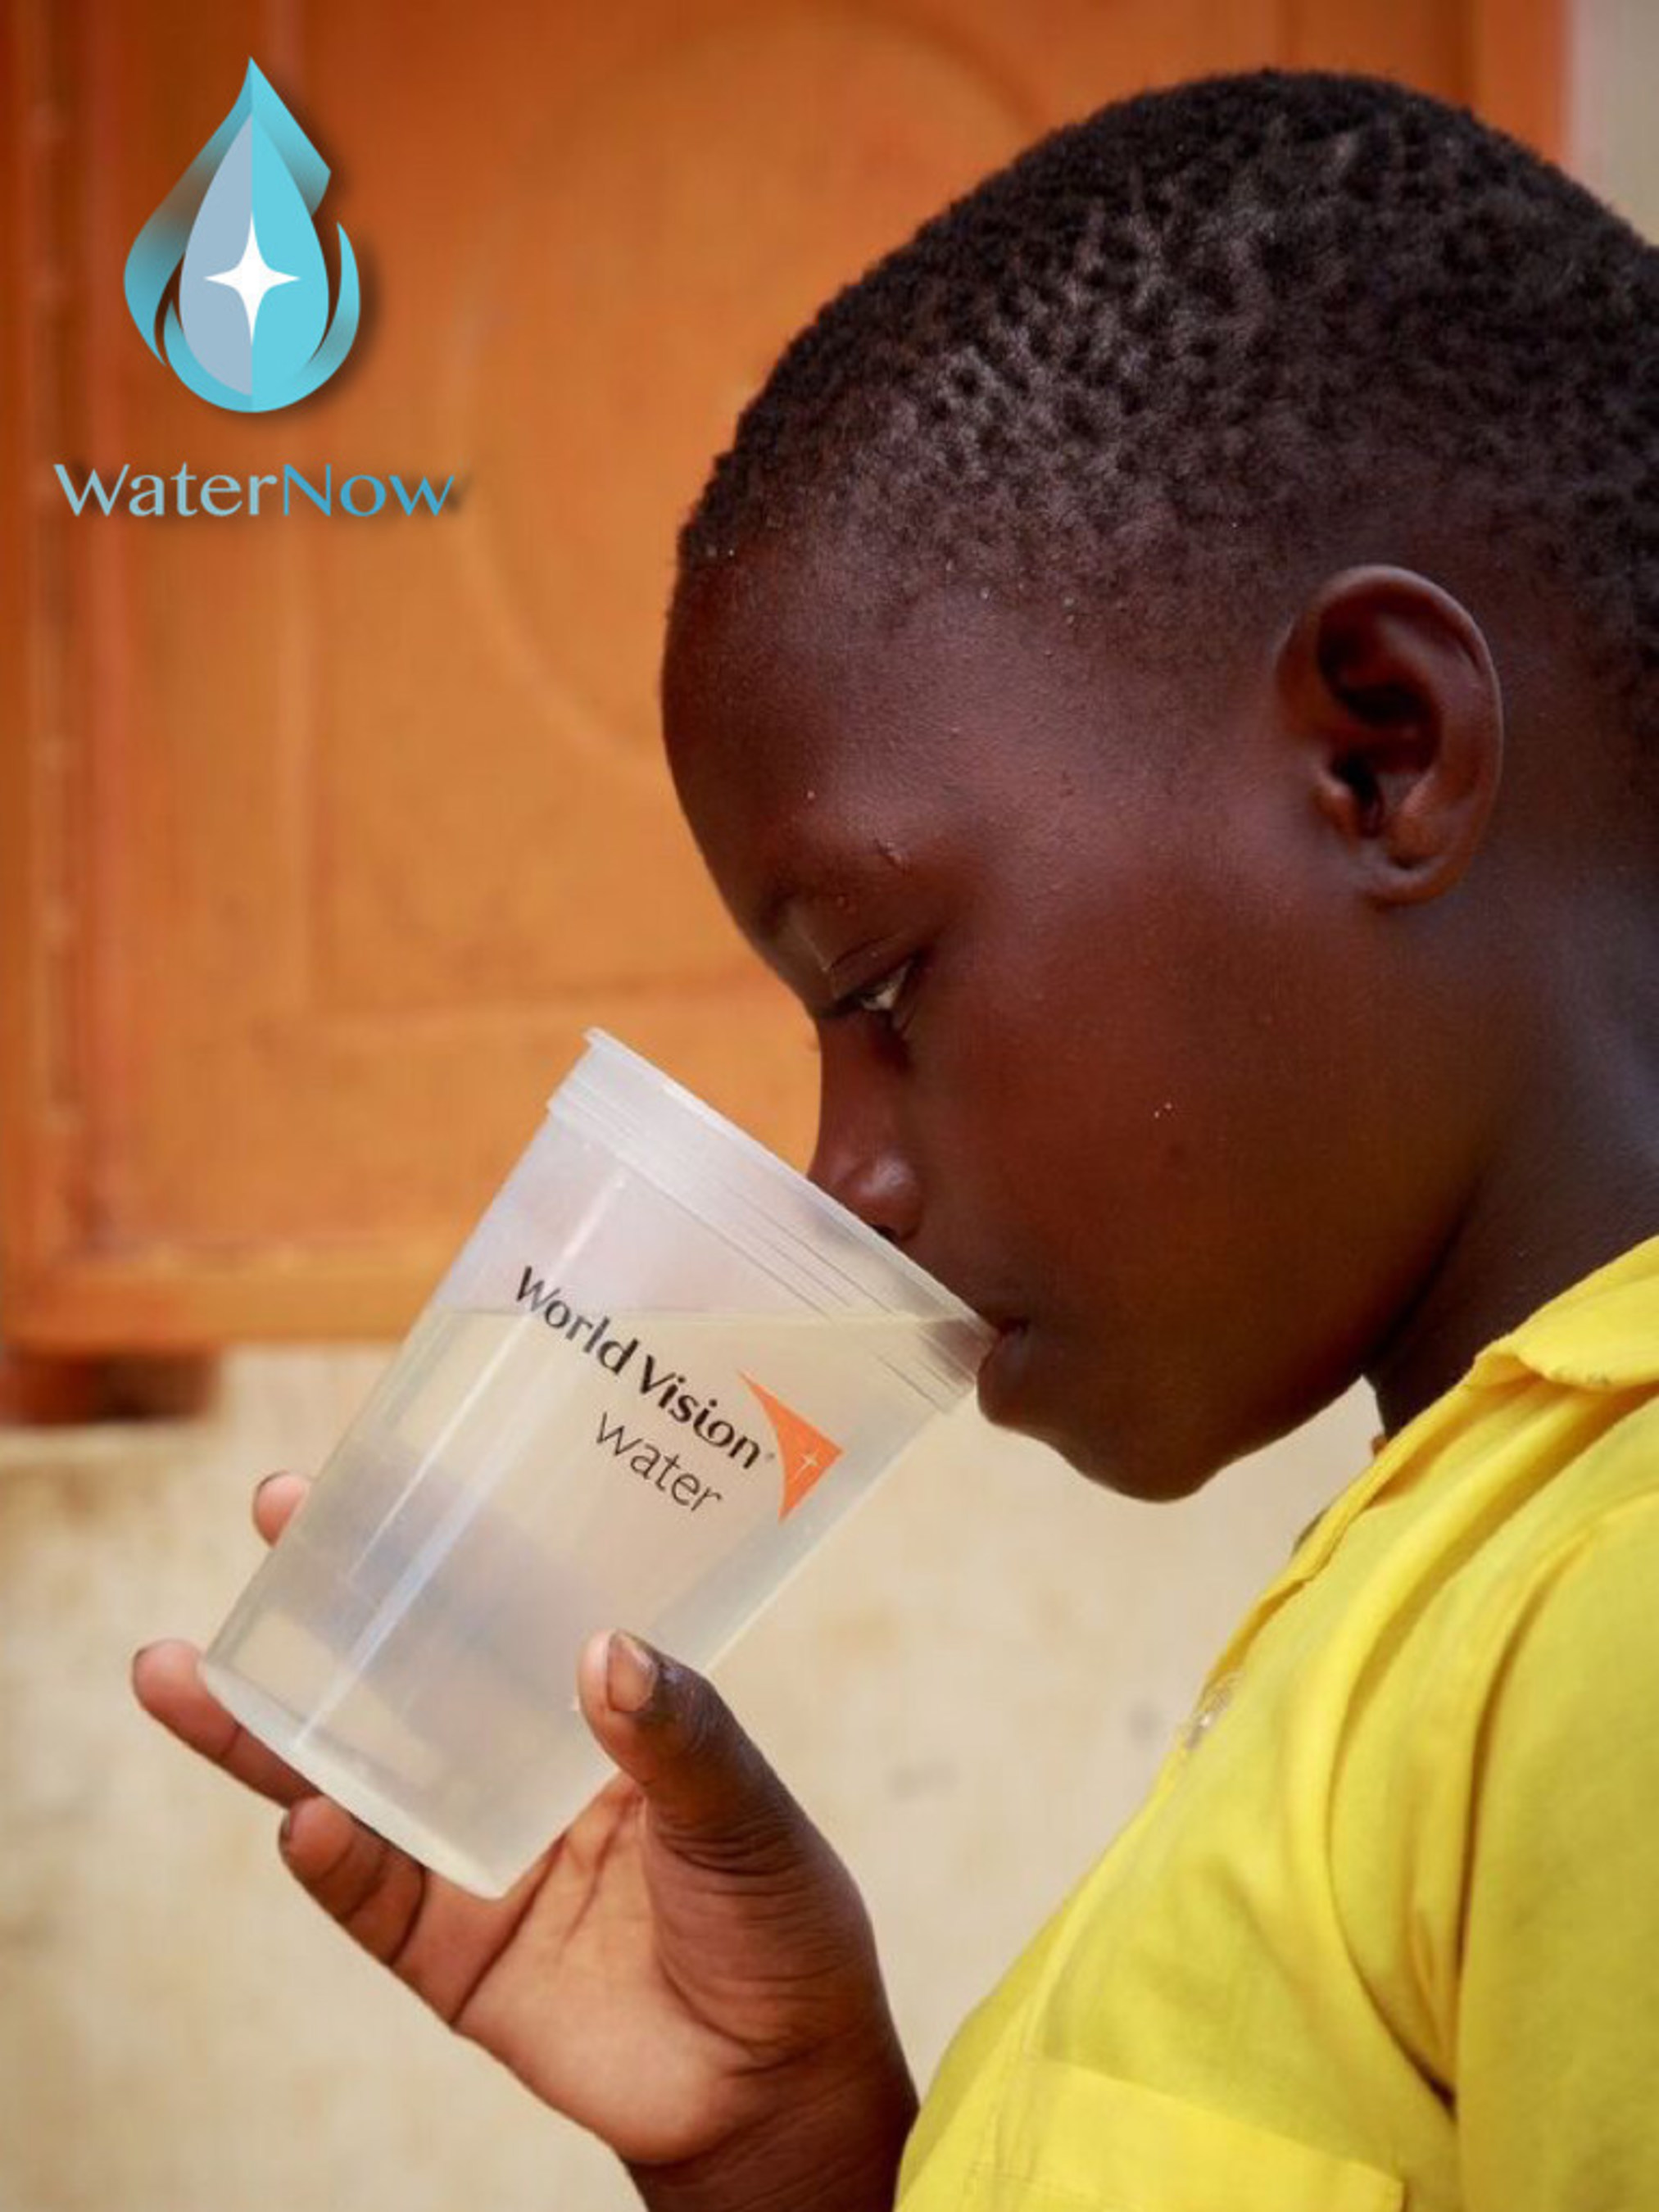 Water Now provides a child in Kenya with clean water on UN World Water Day via World Vision Water